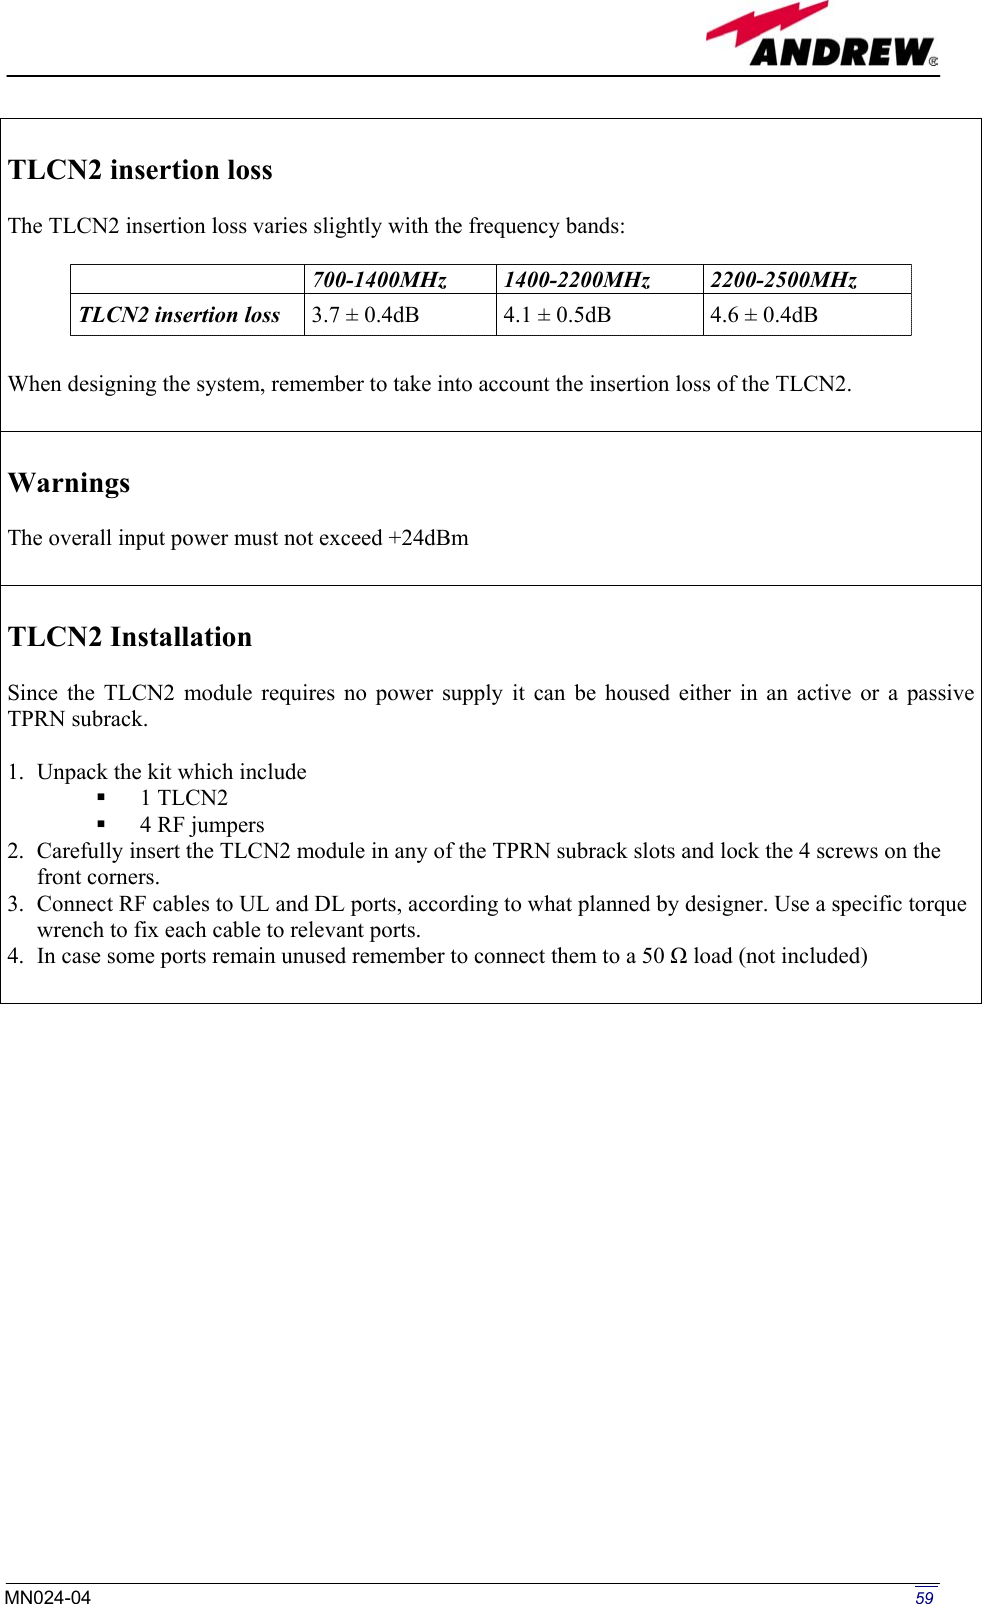   TLCN2 insertion loss   The TLCN2 insertion loss varies slightly with the frequency bands:      When designing the system, remember to take into account the insertion loss of the TLCN2.   700-1400MHz  1400-2200MHz  2200-2500MHz TLCN2 insertion loss  3.7 ± 0.4dB  4.1 ± 0.5dB  4.6 ± 0.4dB  Warnings  The overall input power must not exceed +24dBm   TLCN2 Installation  Since the TLCN2 module requires no power supply it can be housed either in an active or a passive TPRN subrack.  1.  Unpack the kit which include   1 TLCN2   4 RF jumpers 2.  Carefully insert the TLCN2 module in any of the TPRN subrack slots and lock the 4 screws on the front corners. 3.  Connect RF cables to UL and DL ports, according to what planned by designer. Use a specific torque wrench to fix each cable to relevant ports. 4.  In case some ports remain unused remember to connect them to a 50 Ω load (not included)                          59MN024-04  